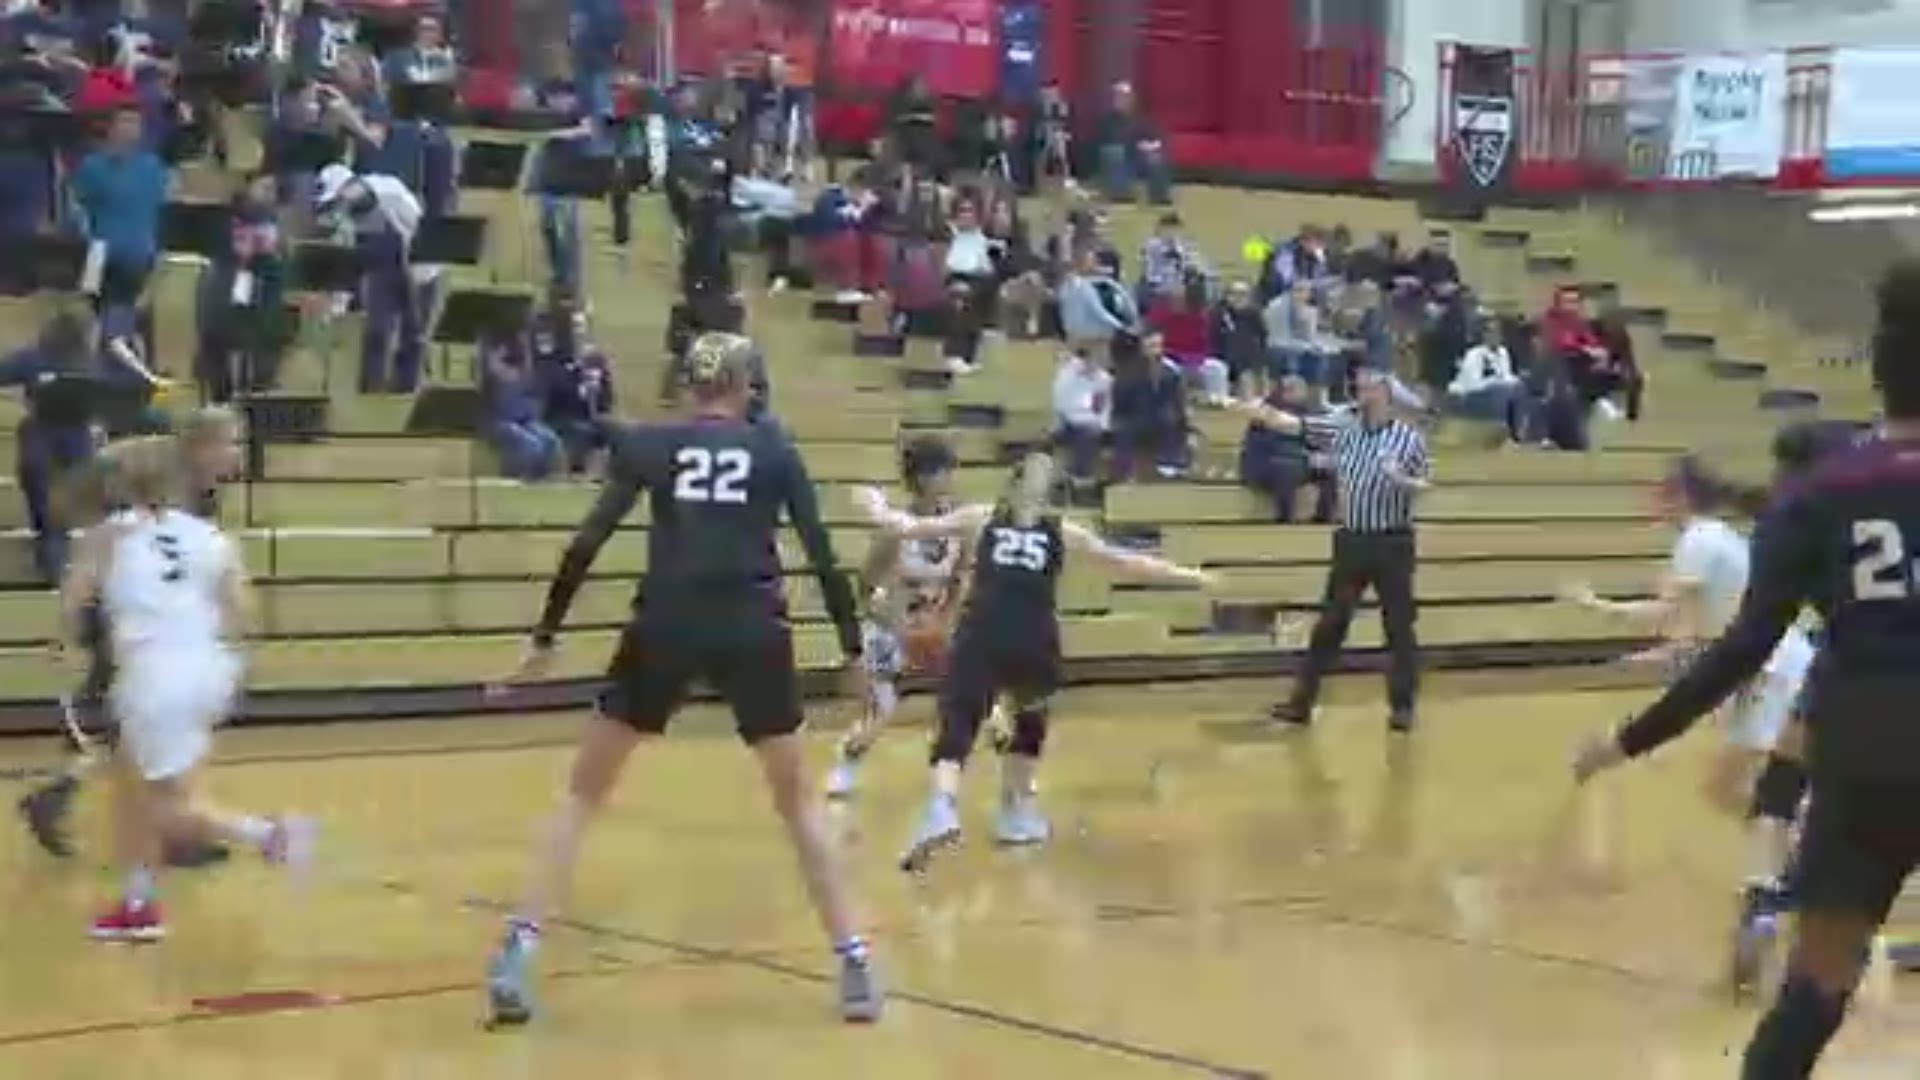 Highlights of the Westview Wildcats 2019 girls basketball team. Highlights were part of KGW’s Friday Night Hoops coverage. #KGWPreps